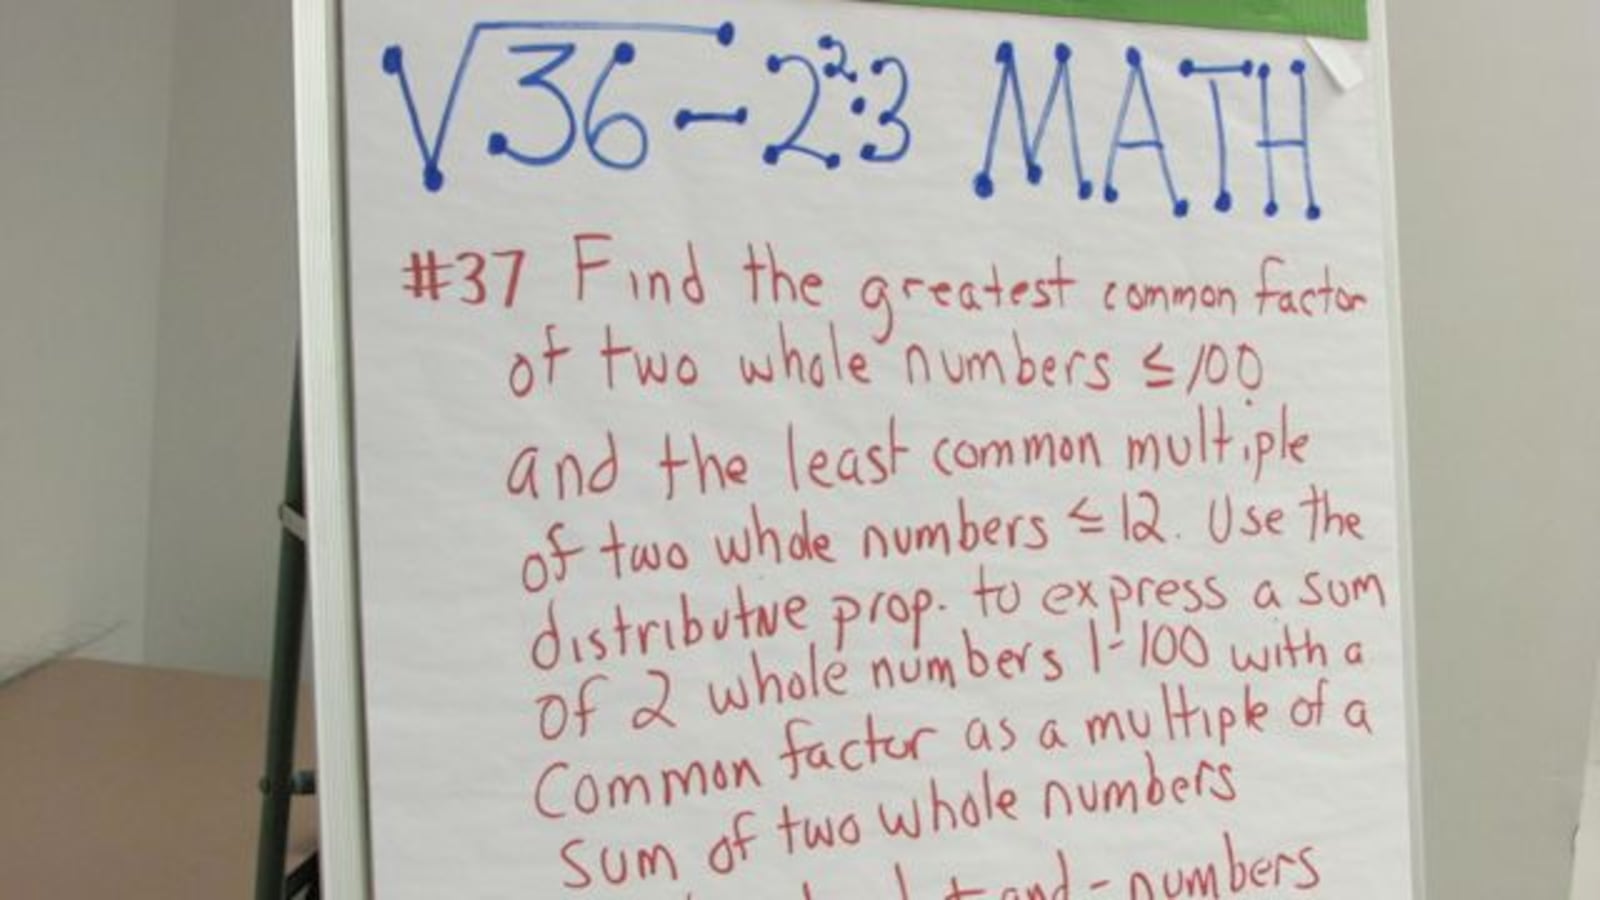 Notes from a committee during work to create new Indiana math standards in last year.